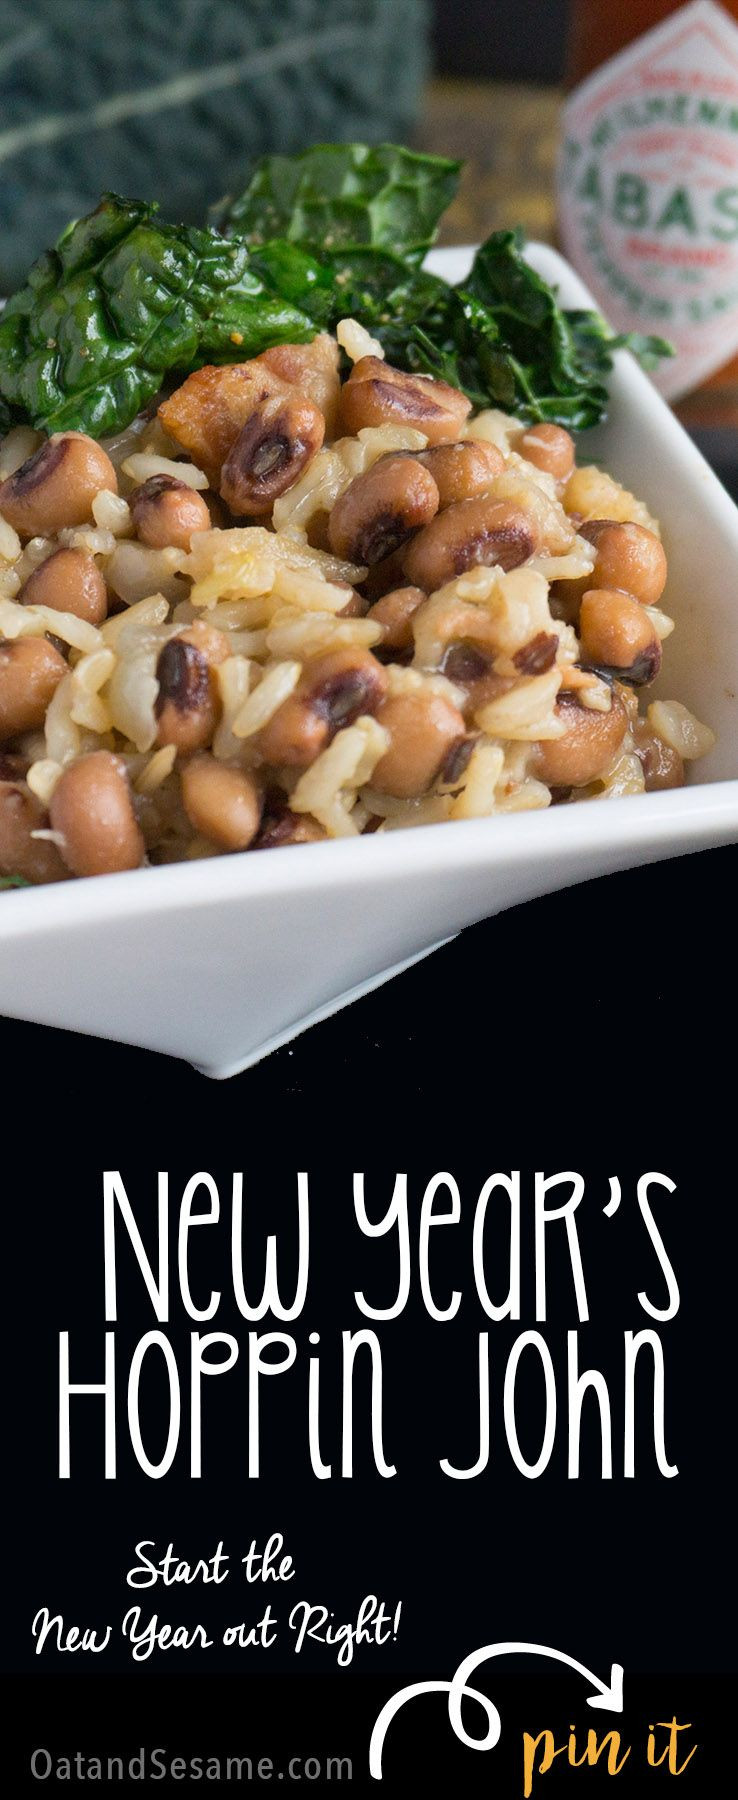 New Year Day Dinner Traditions
 Skillet Hoppin John Southern Black Eyed Peas and Rice